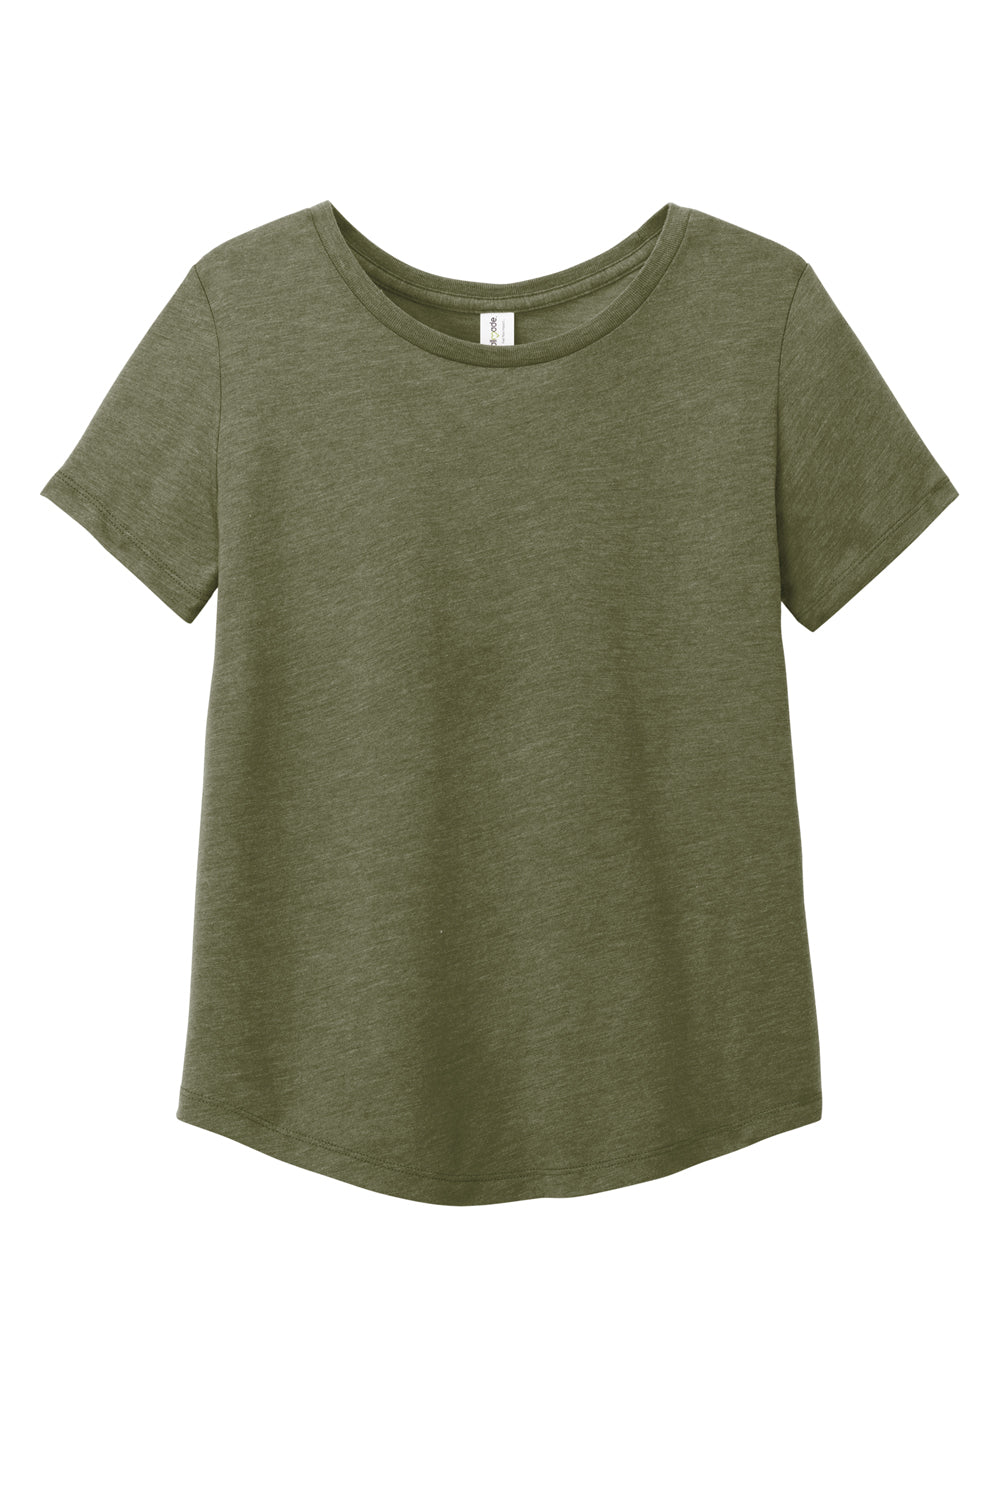 Allmade AL2015 Womens Short Sleeve Scoop Neck T Shirt Olive You Green Flat Front